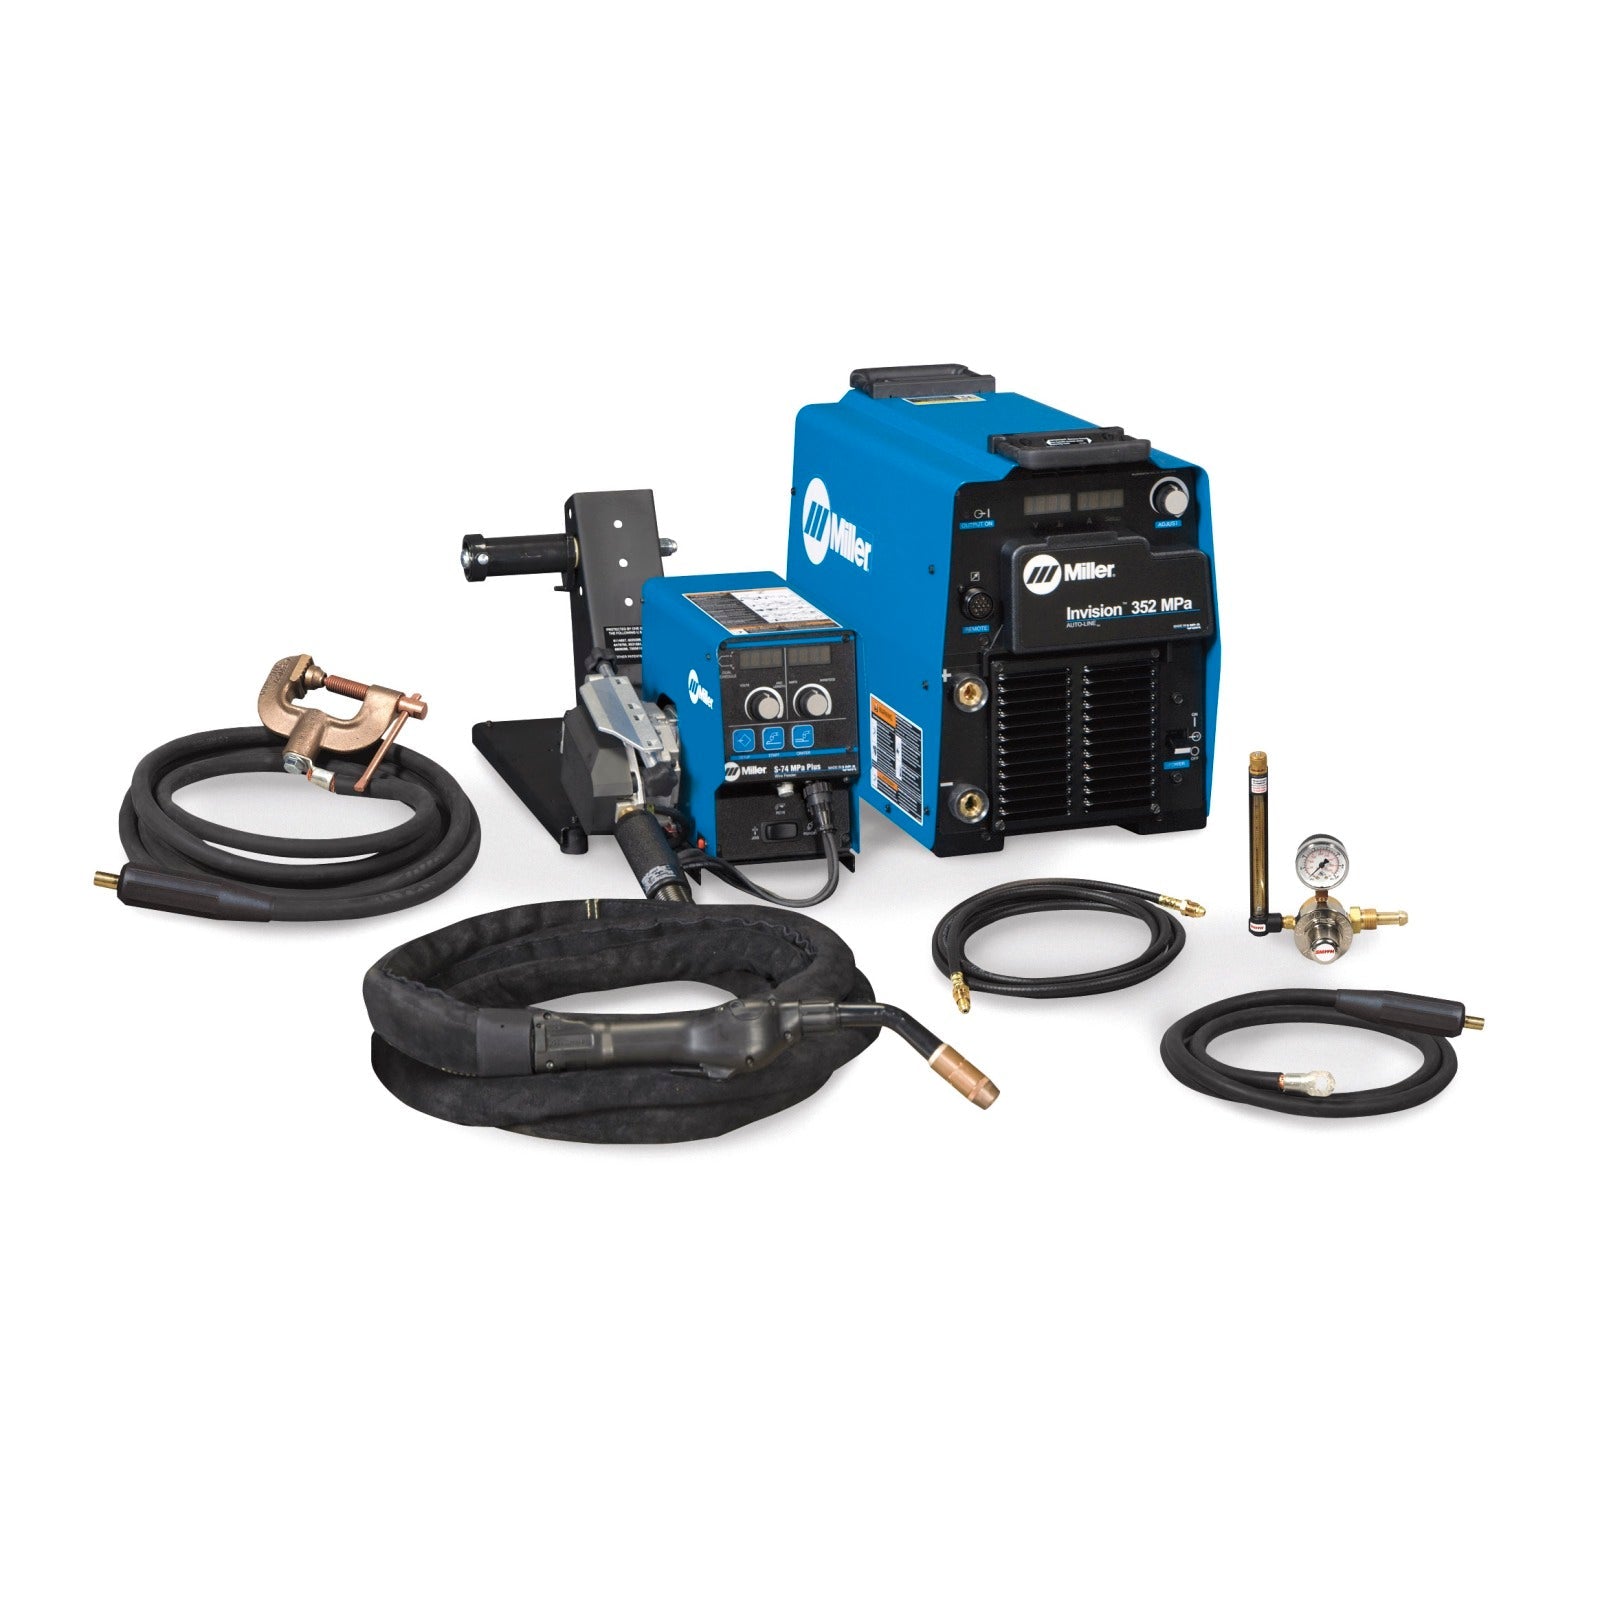 Miller Invision 352 MPa MIG Welder with Feeder and Accessory Package (951283)